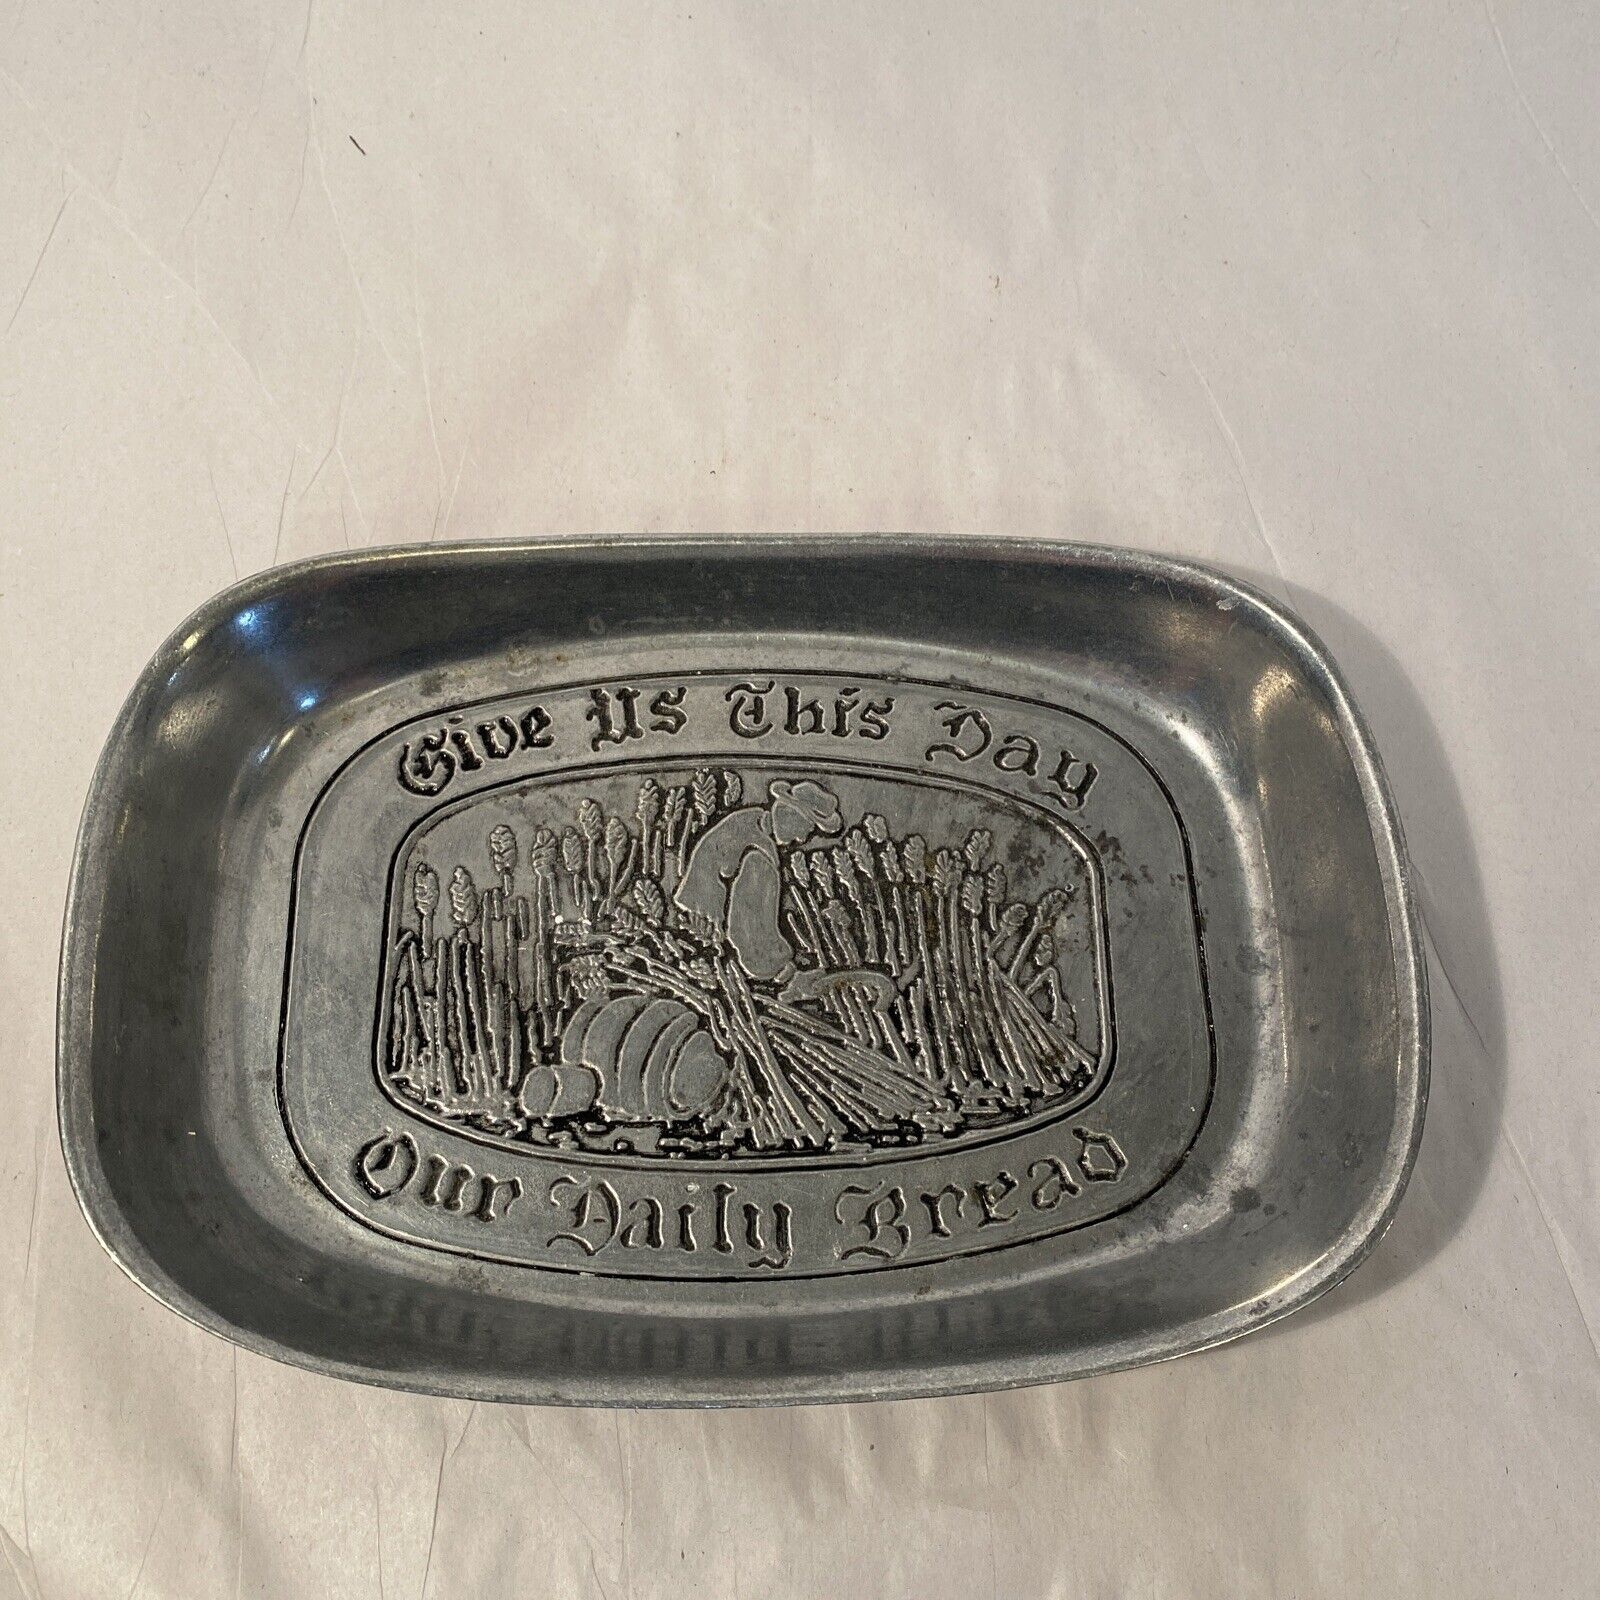 Wilton Armetale Pewter Tray - Give Us this Day Our Daily Bread